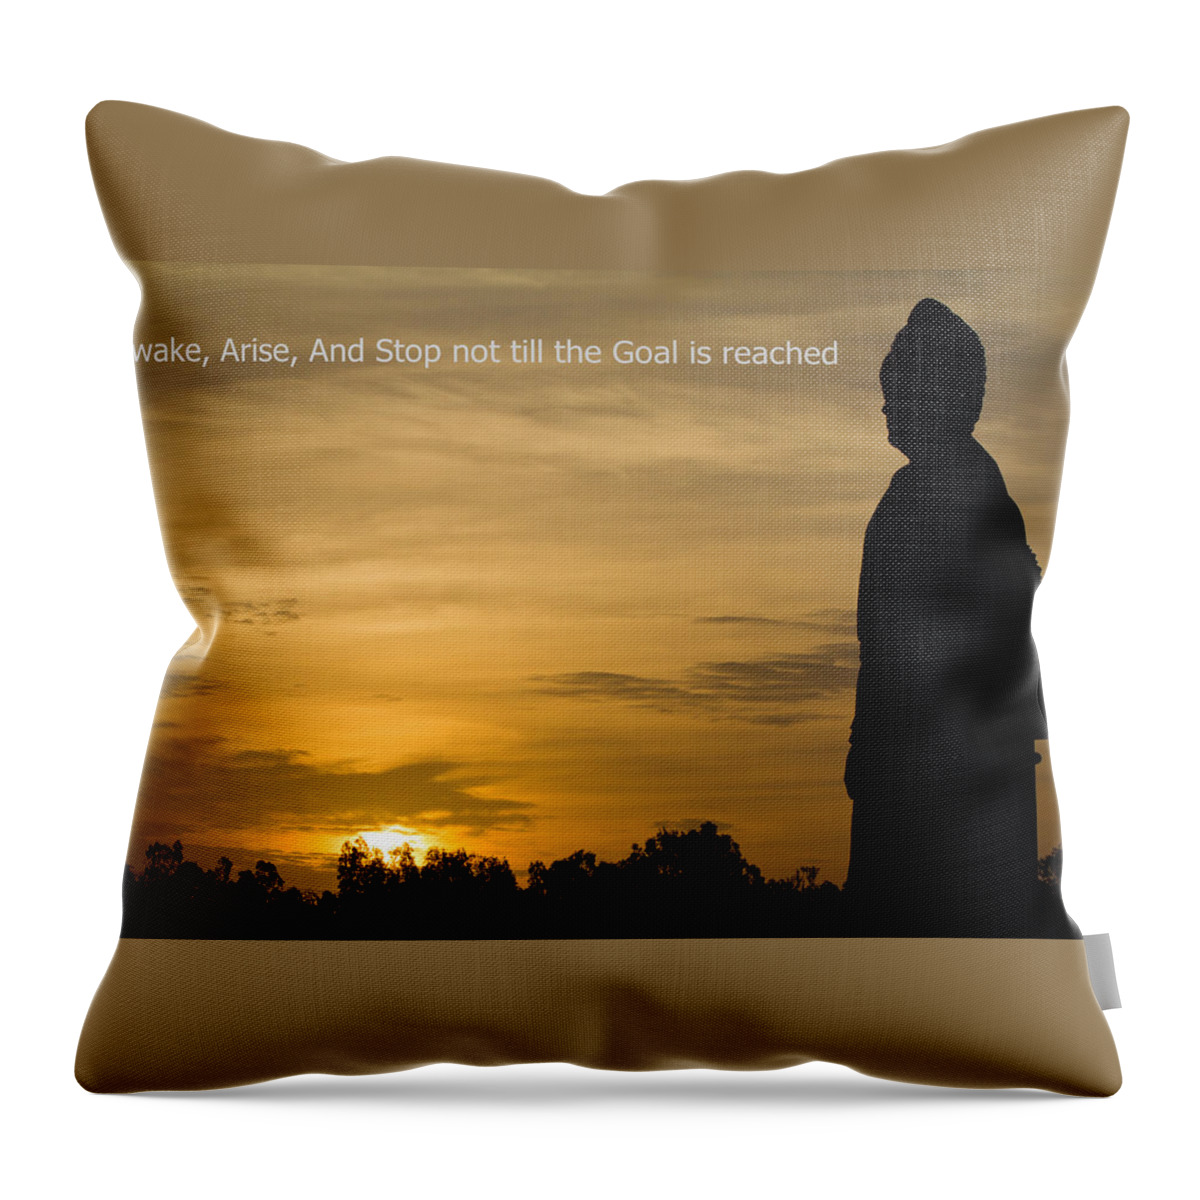 Swami Vivekananda Throw Pillow featuring the photograph Arise Awake and Stop not till the Goal is Reached by SAURAVphoto Online Store